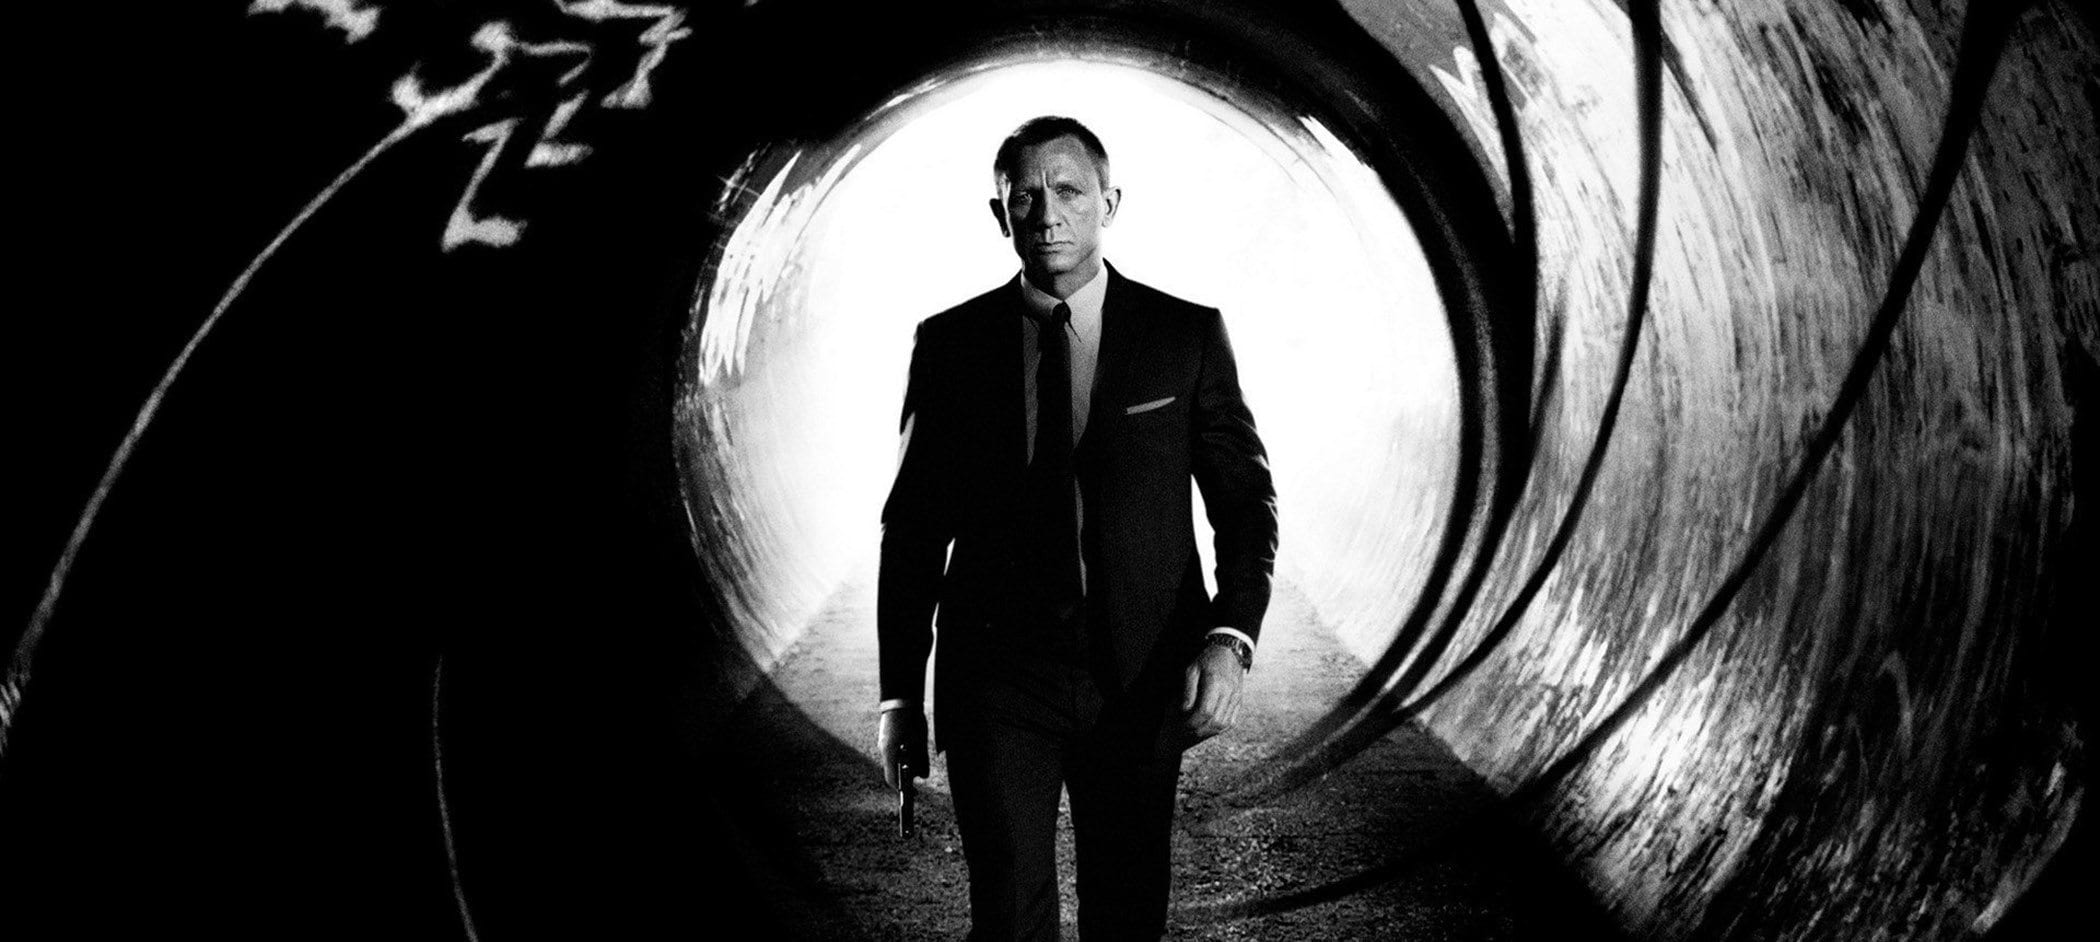 With rumors flying about that Danny Boyle is high on the list to direct the currently untitled 25th 'James Bond' flick, IndieWire explained why he would be a “disastrous choice” for the franchise. We've decided to flip this on its head and speculate what the Bond world would look like if a woman were behind the lens.